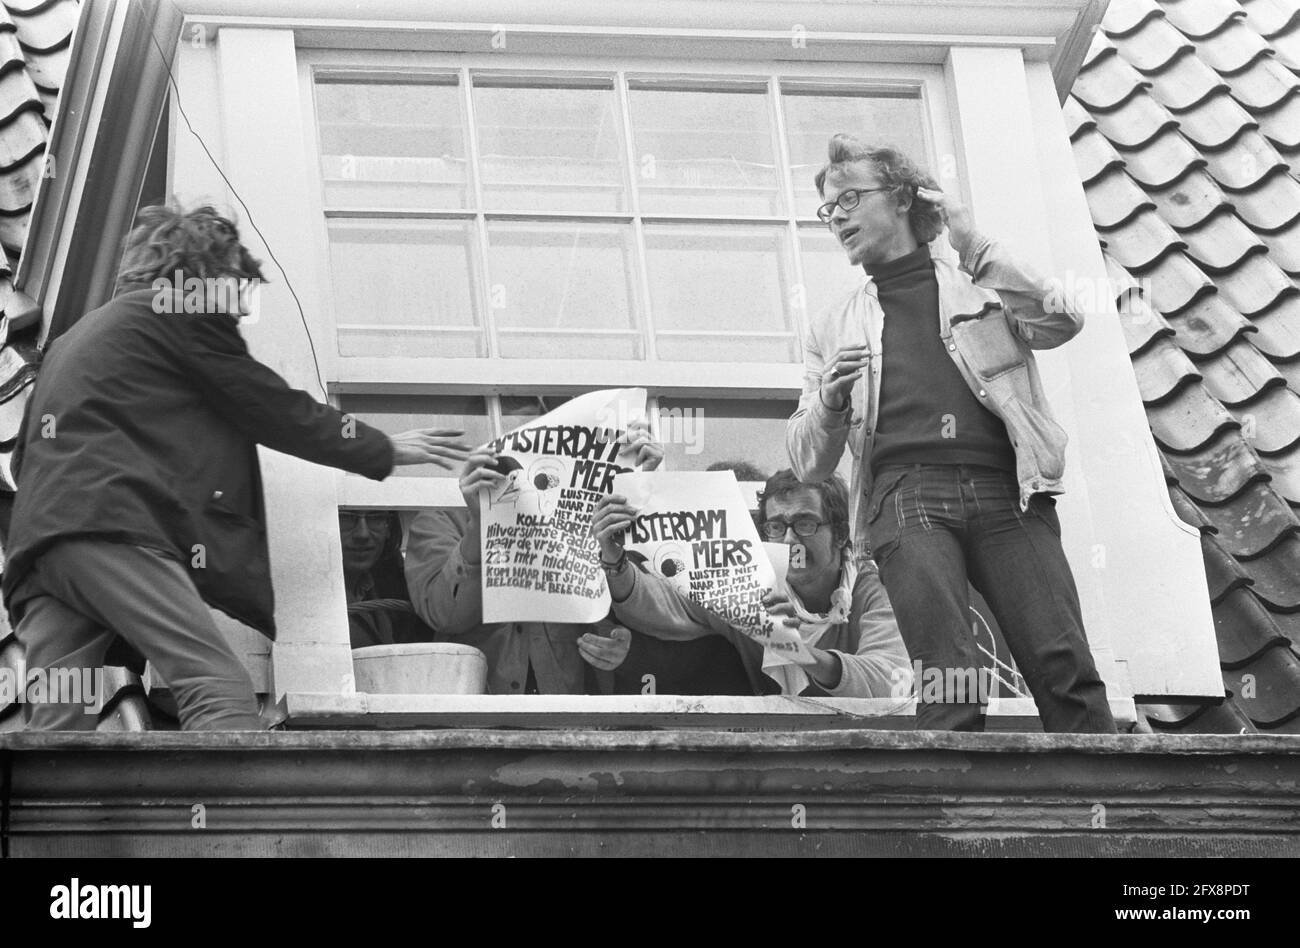 Occupation Maagdenhuis Amsterdam, by students police on roof Maagdenhuis, looking out of the windows occupiers, 20 May 1969, POLICE, occupations, students, The Netherlands, 20th century press agency photo, news to remember, documentary, historic photography 1945-1990, visual stories, human history of the Twentieth Century, capturing moments in time Stock Photo